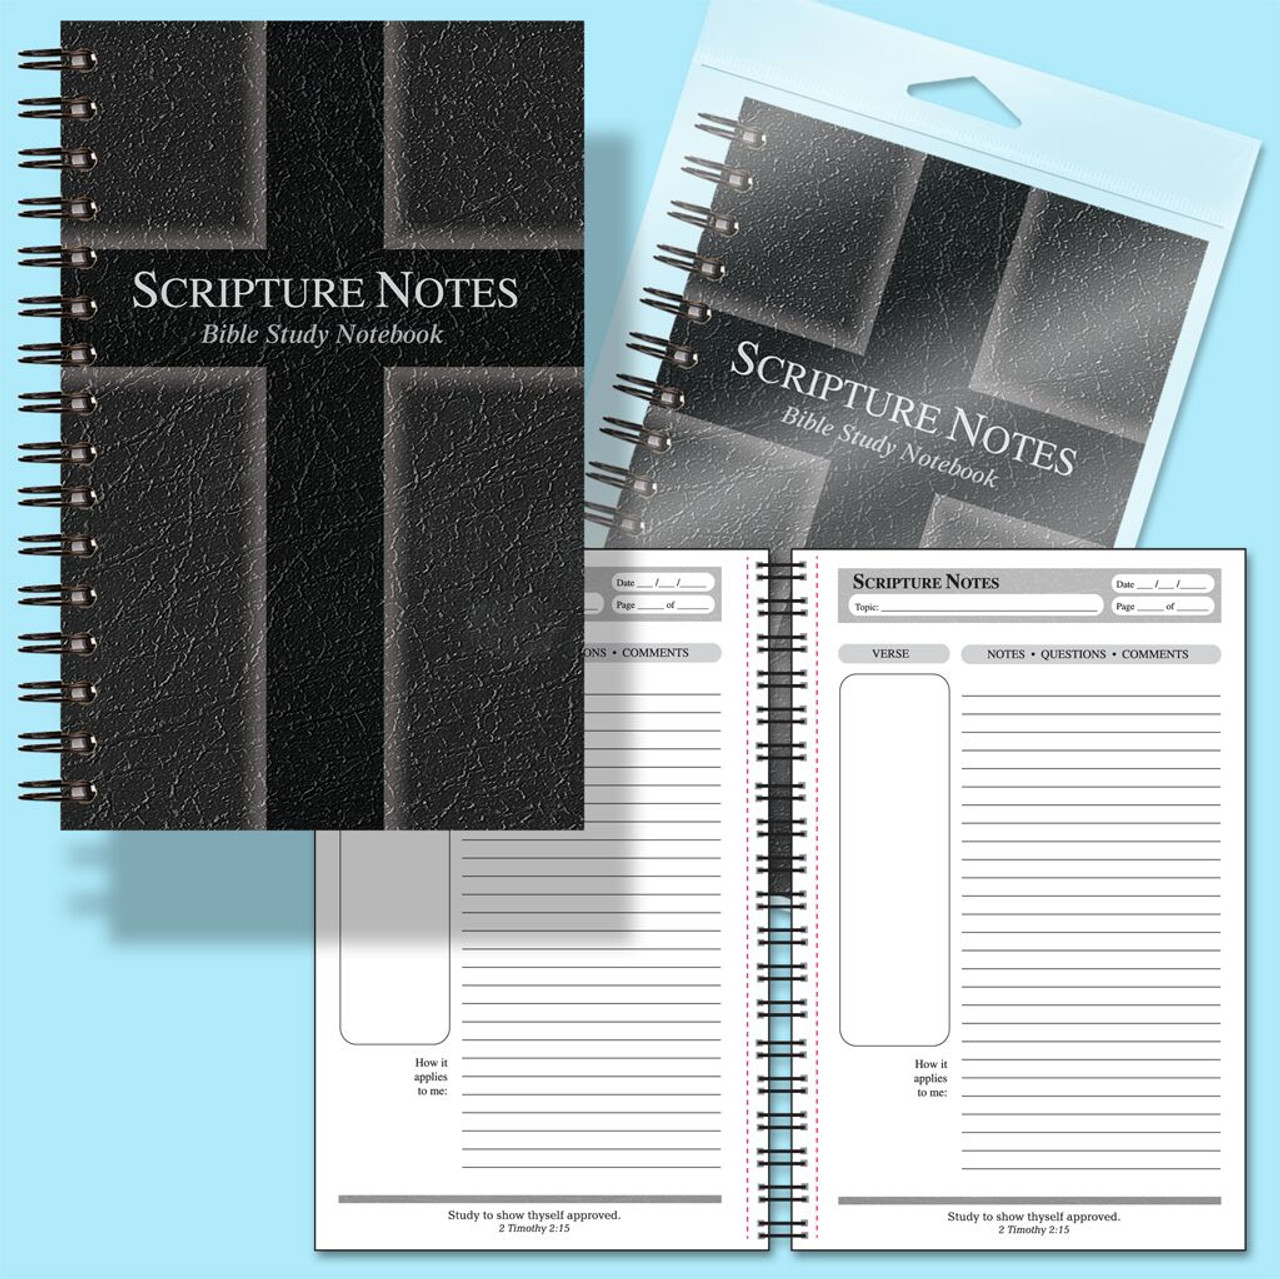 Bible Study Journal: Scripture Notes Bible Study Notebook – A Notebook for Recording Scripture and Sermon Notes, Weekly Prayer List Notebook – Bib